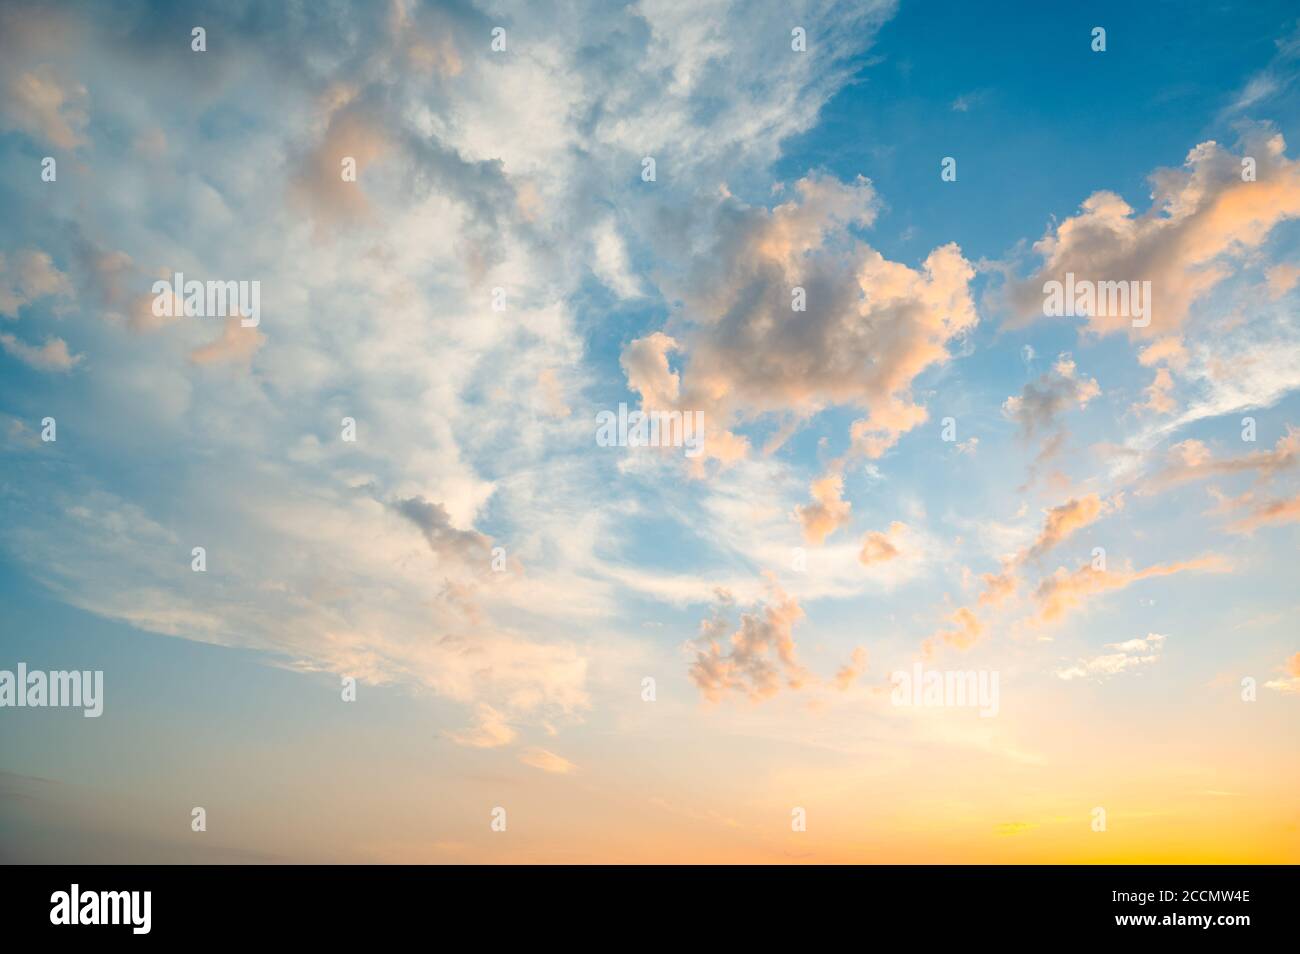 Beautiful summer sky full of clouds at sunset at golden hour. Interesting warm colors on the horizon. Stock Photo